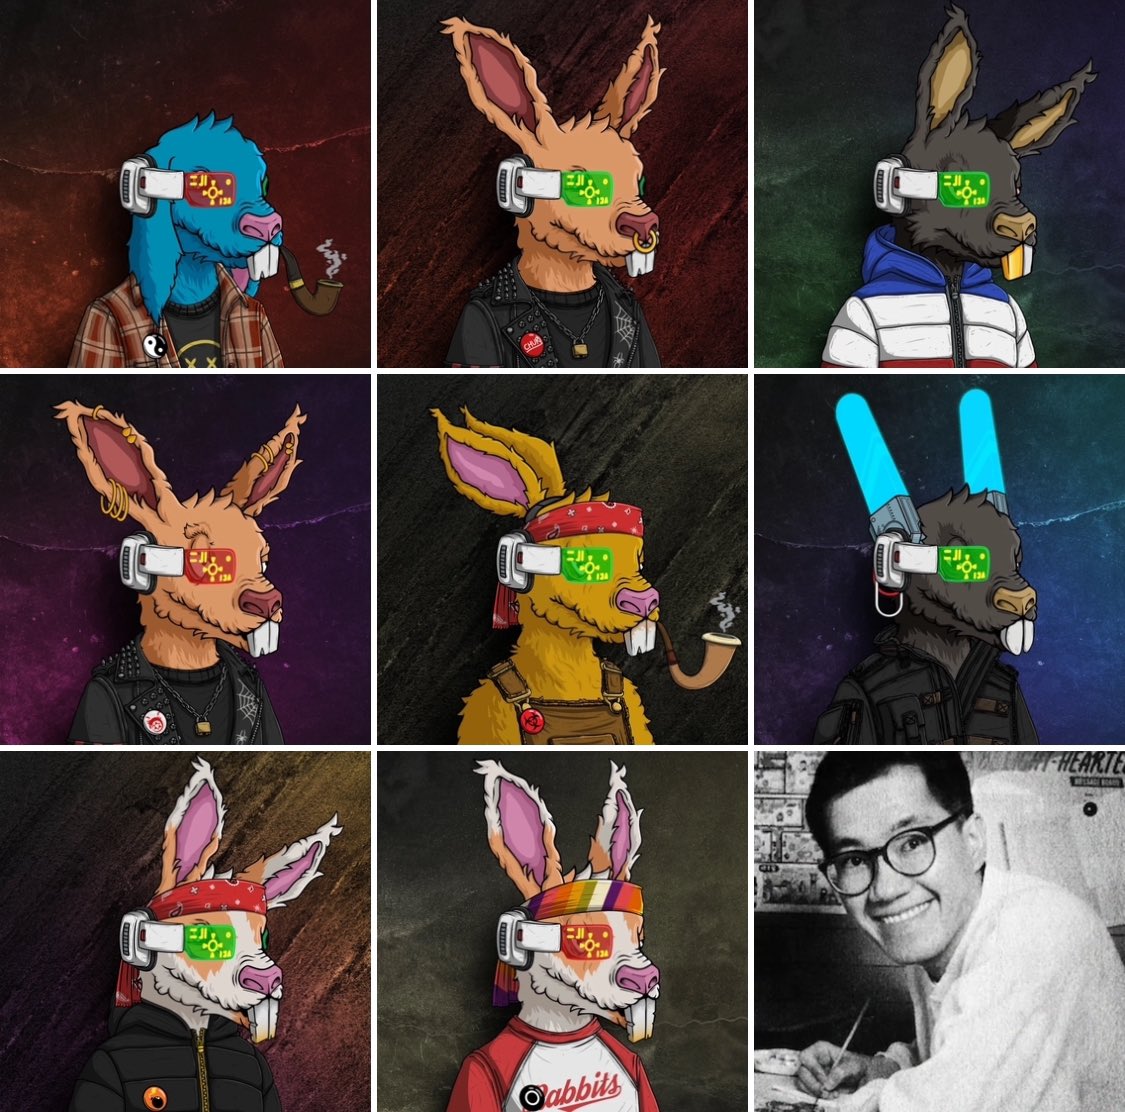 Akira Toriyama was an inspirational artist, one of the best of our lifetime. His influence will live on in our own imaginations and world culture. The @DeadRabbitRS pay tribute to Akira’s legacy with the Dragonball Eyewear traits.